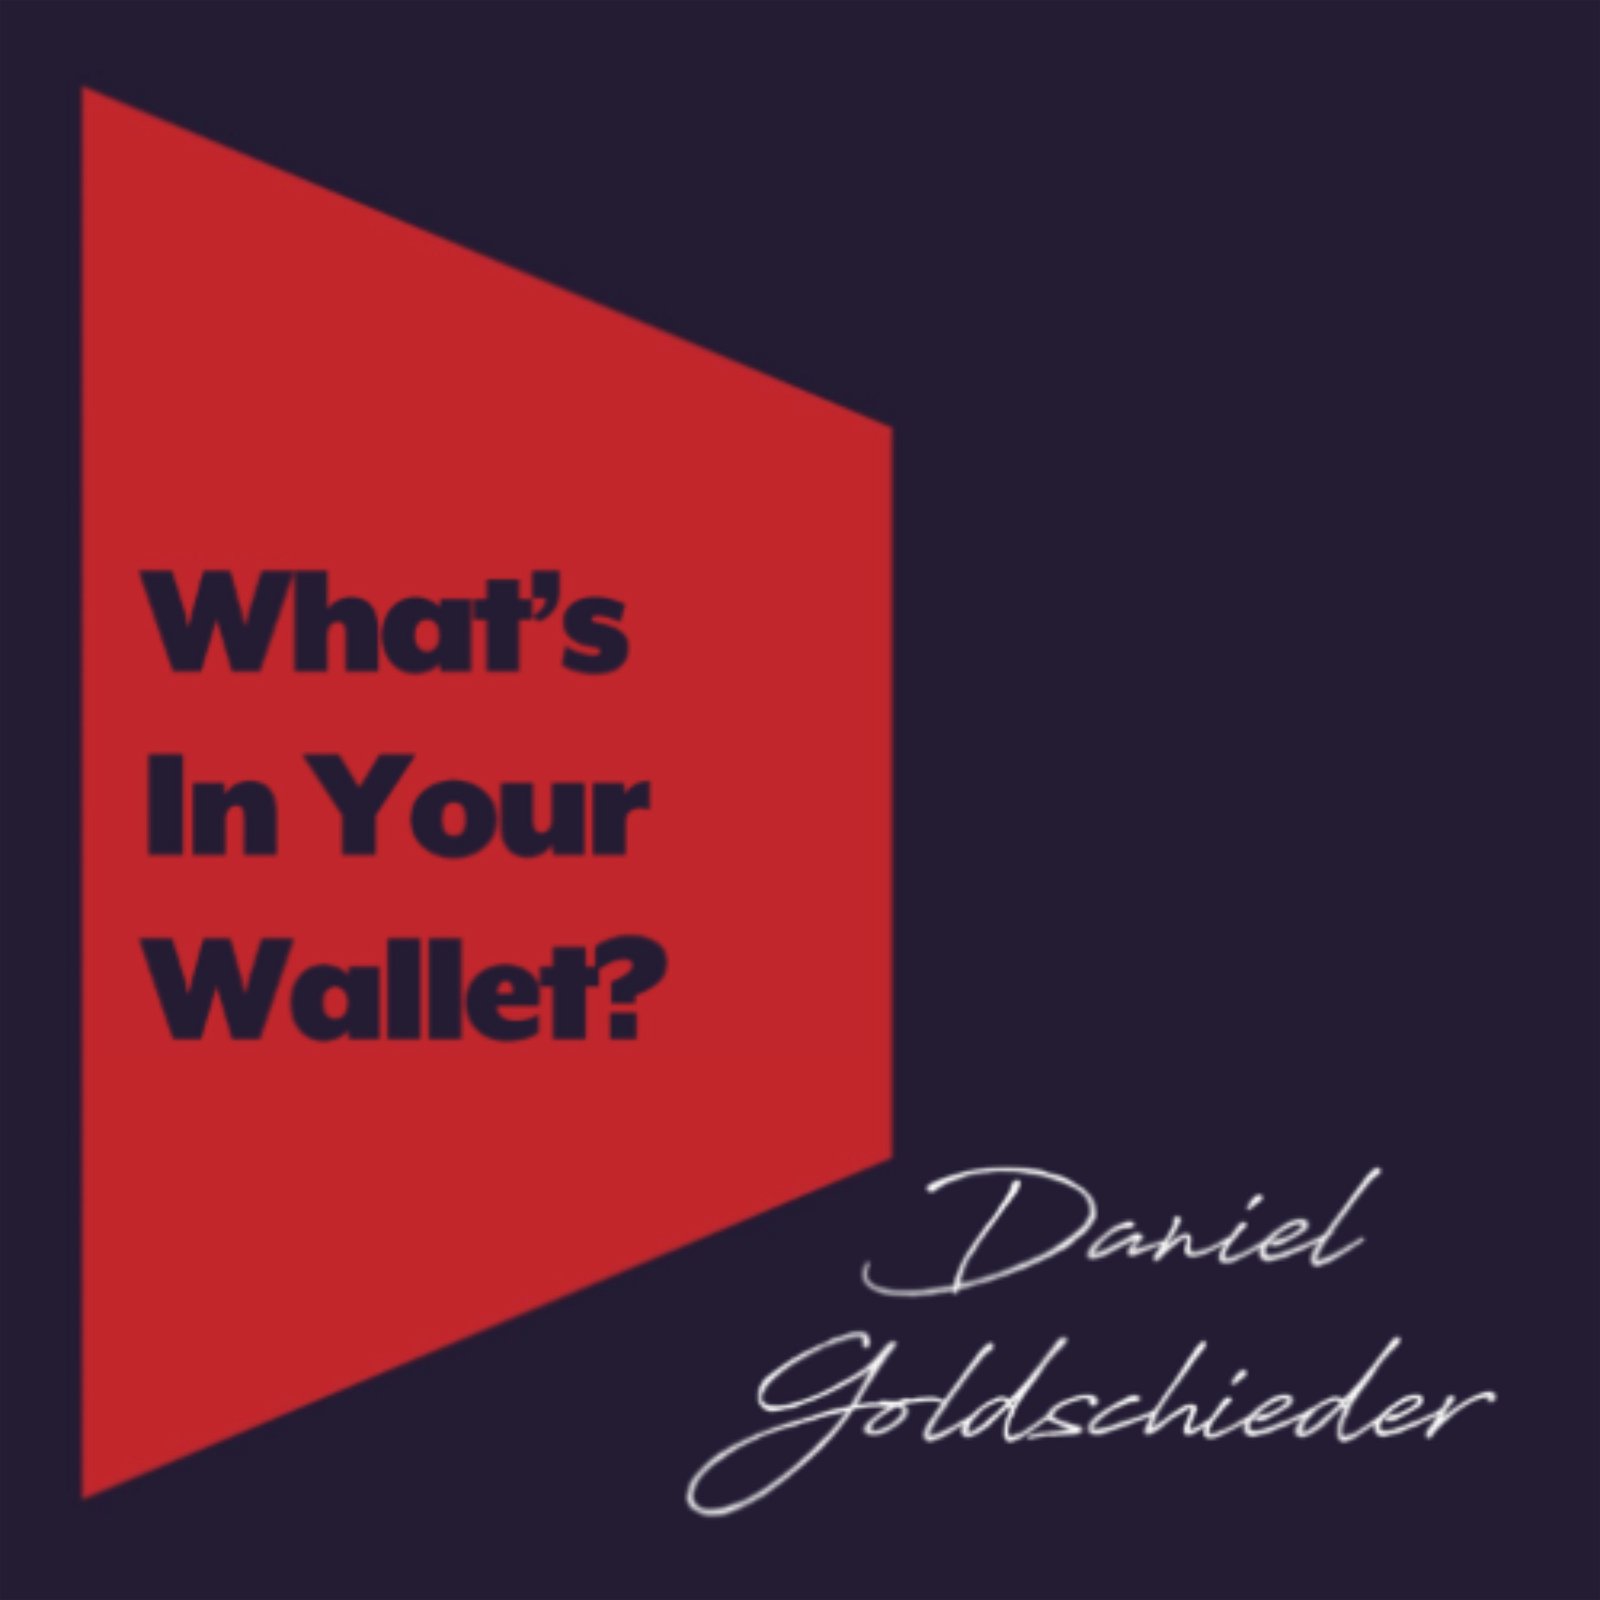 What’s in Your Wallet?